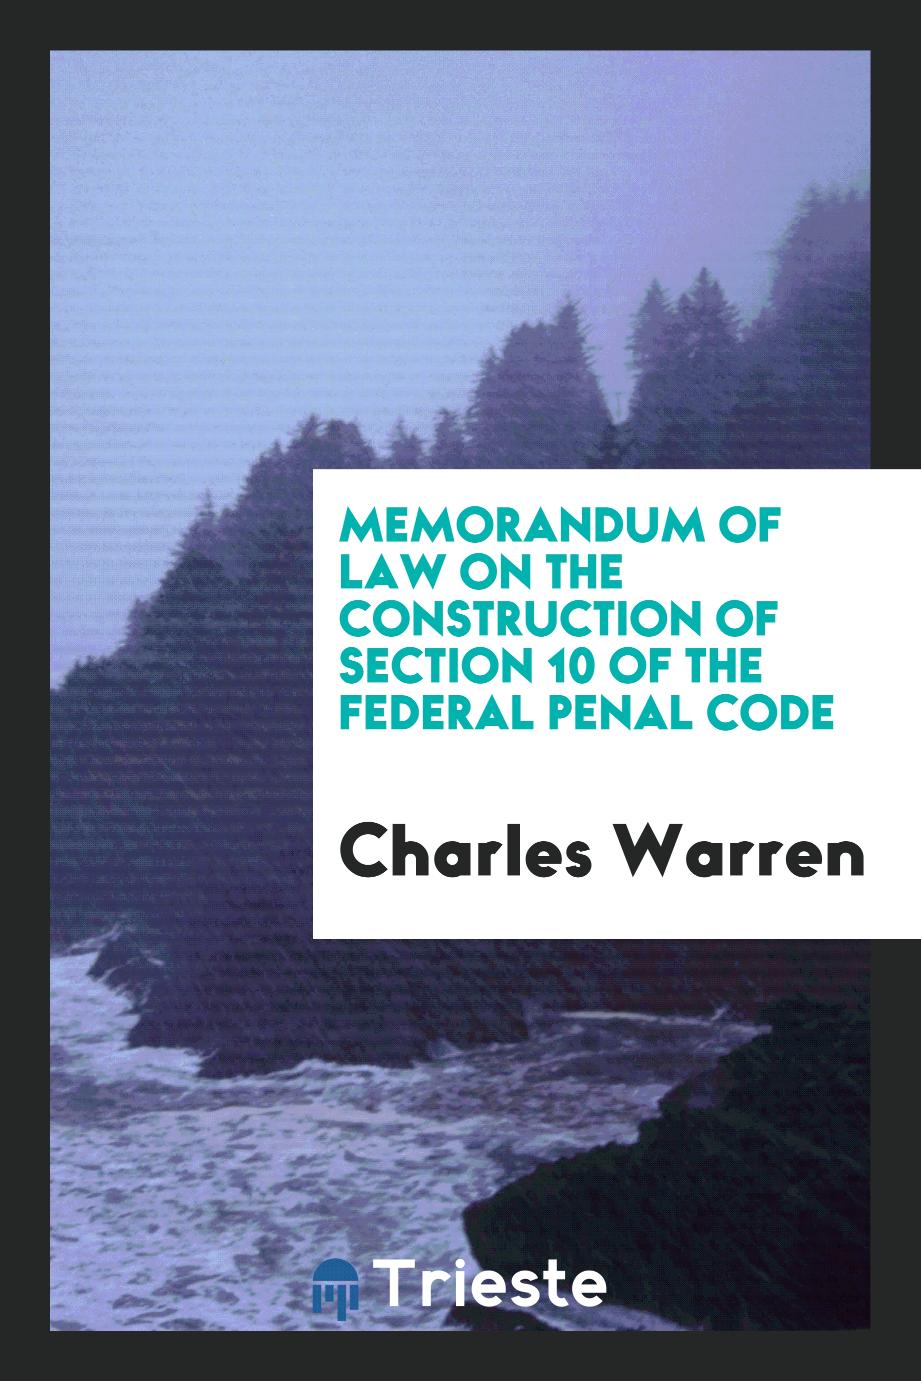 Charles Warren - Memorandum of Law on the Construction of Section 10 of the Federal Penal Code